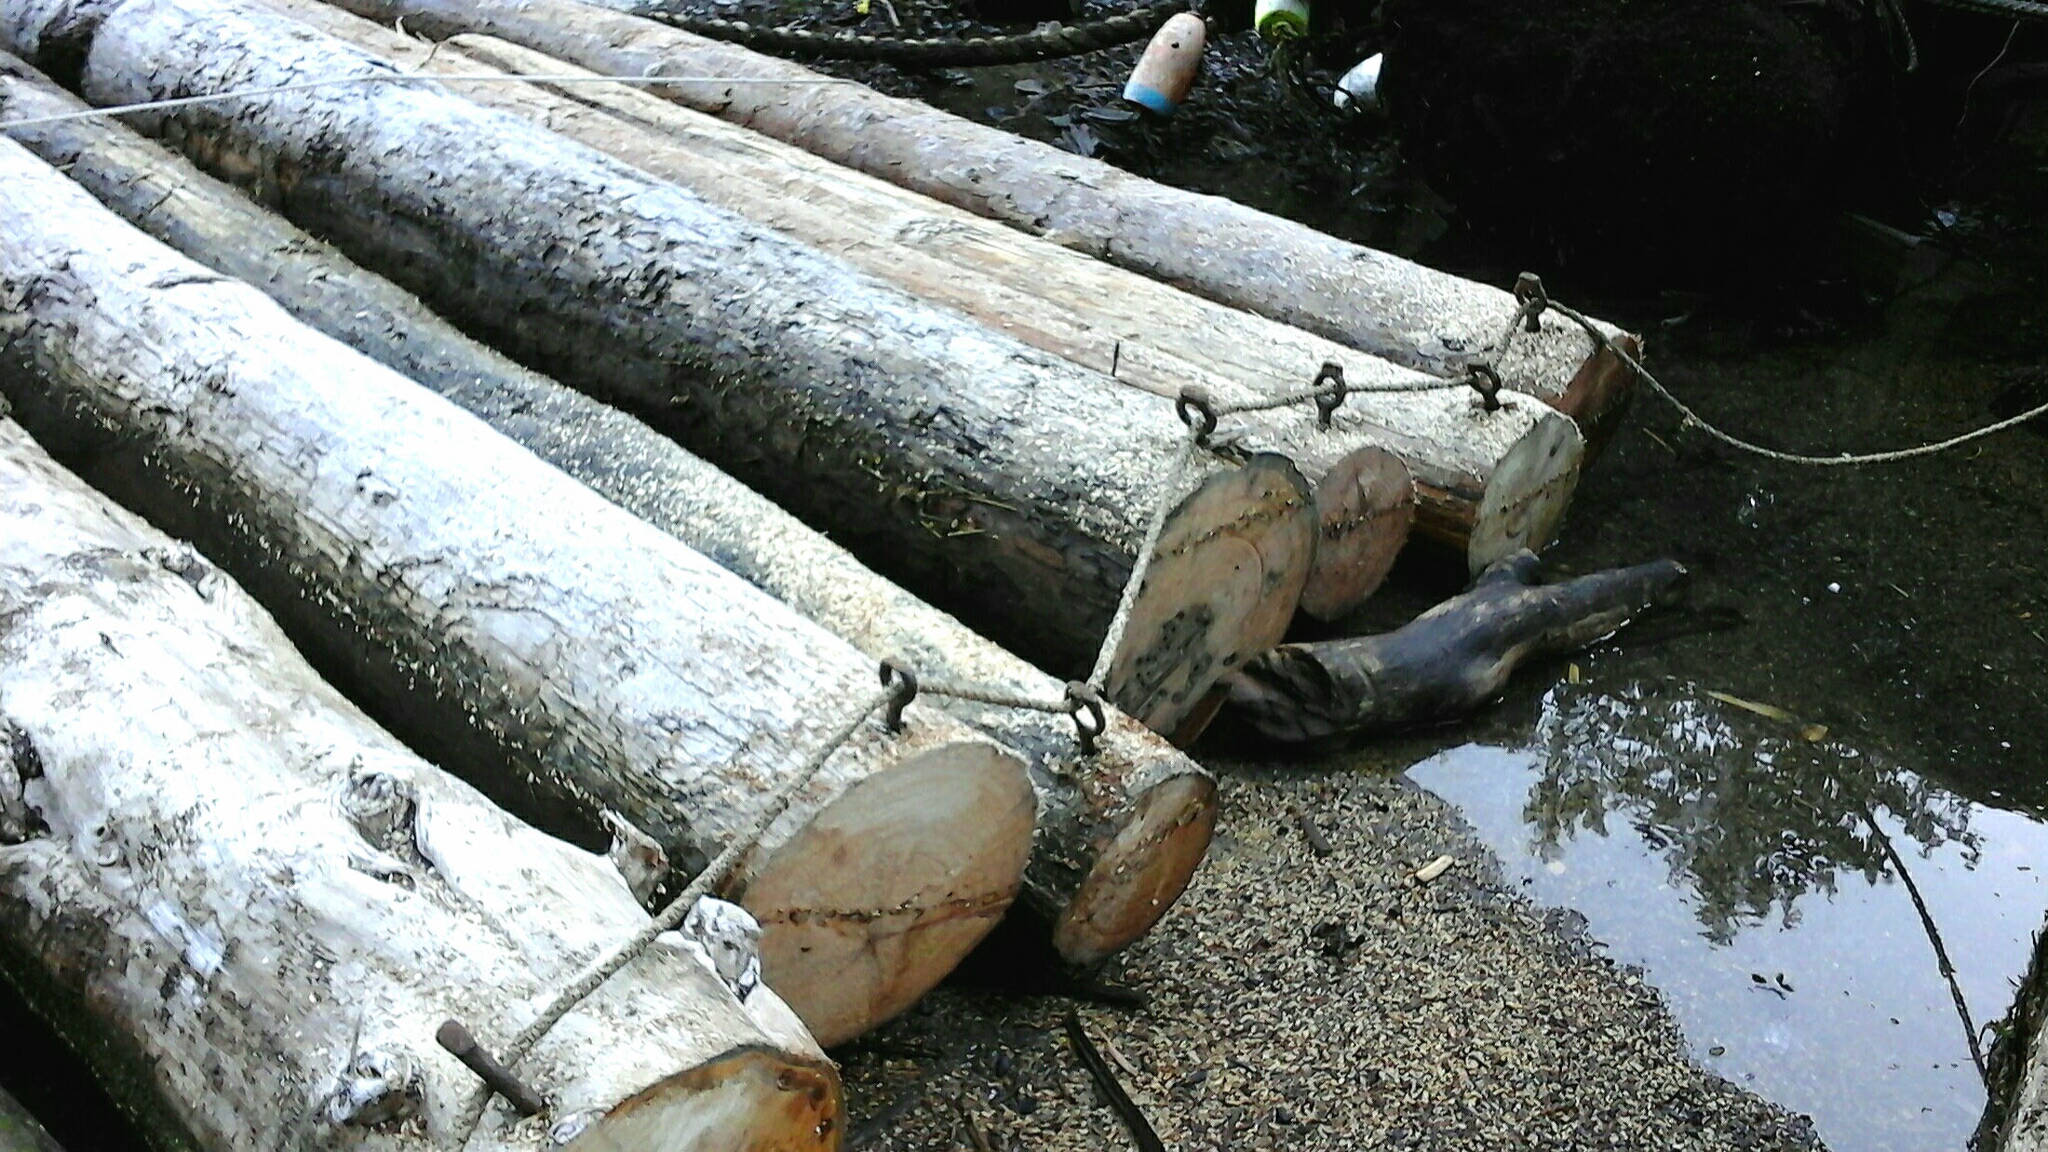 Logs corraled by a line through their dogs, waiting to be sawed into firewood. (Tara Neilson | For the Capital City Weekly)